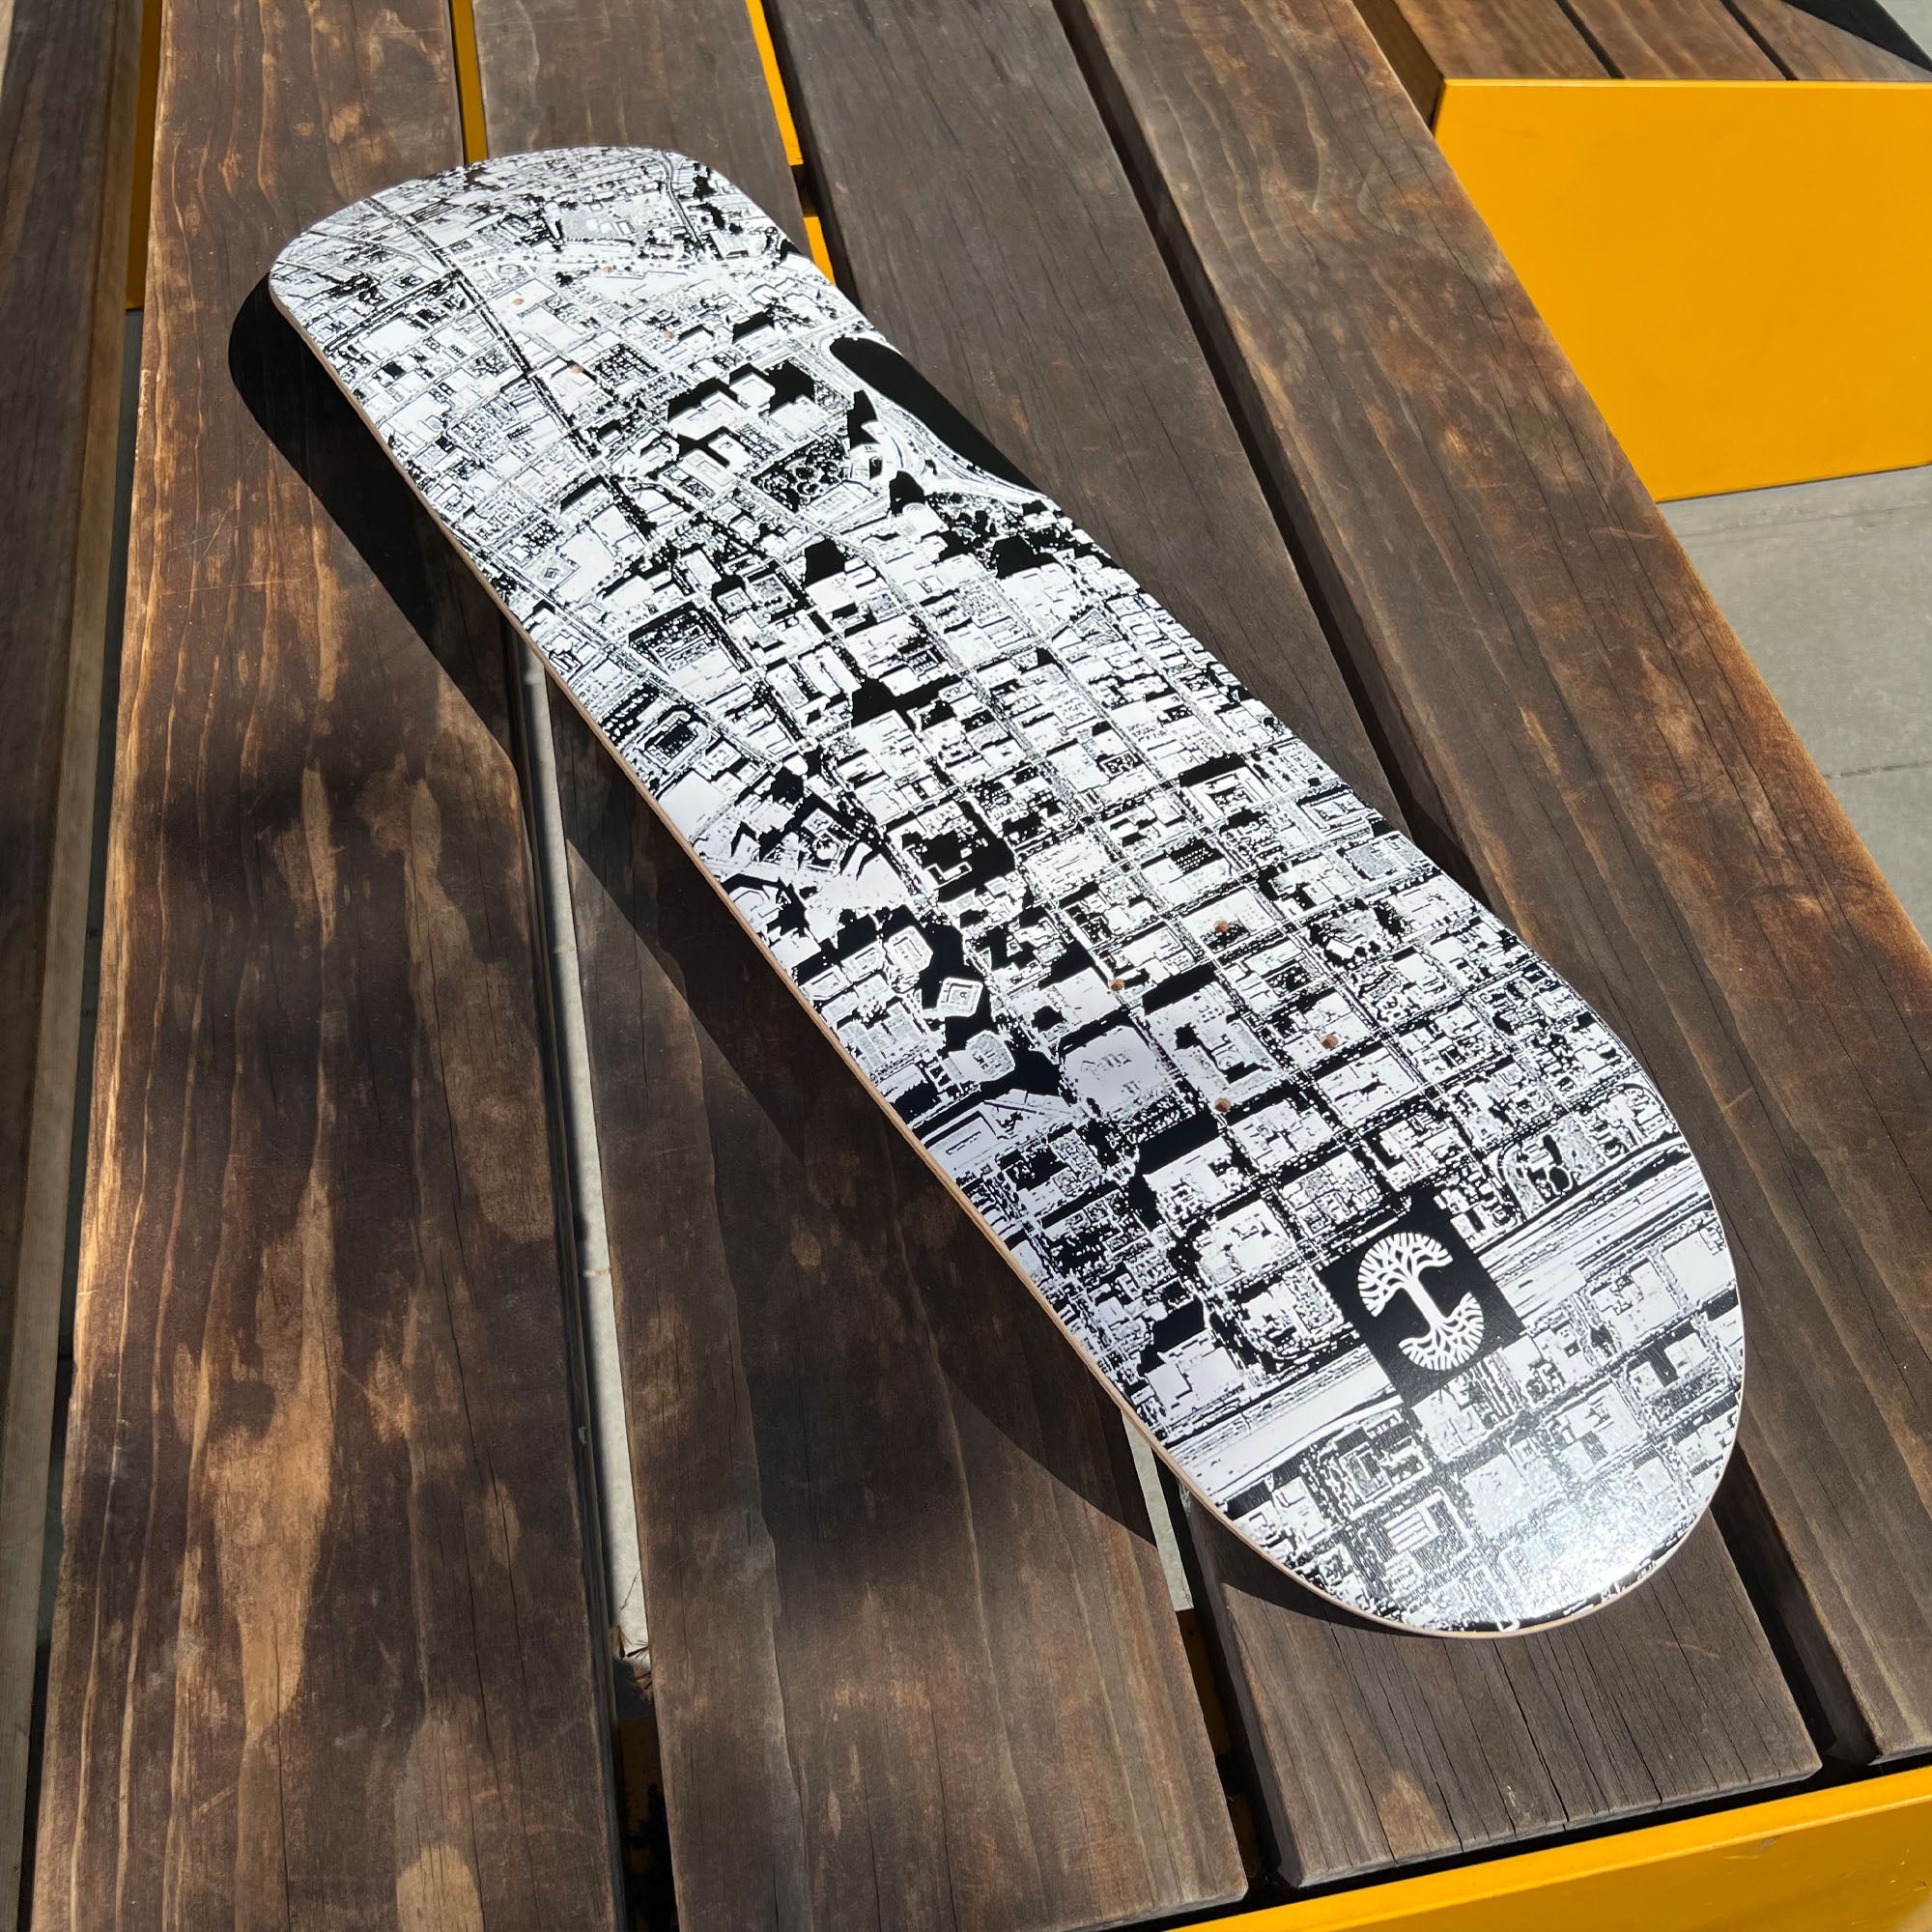 Black & white skateboard deck with an aerial image of Oakland and Lake Merritt on a wooden deck.